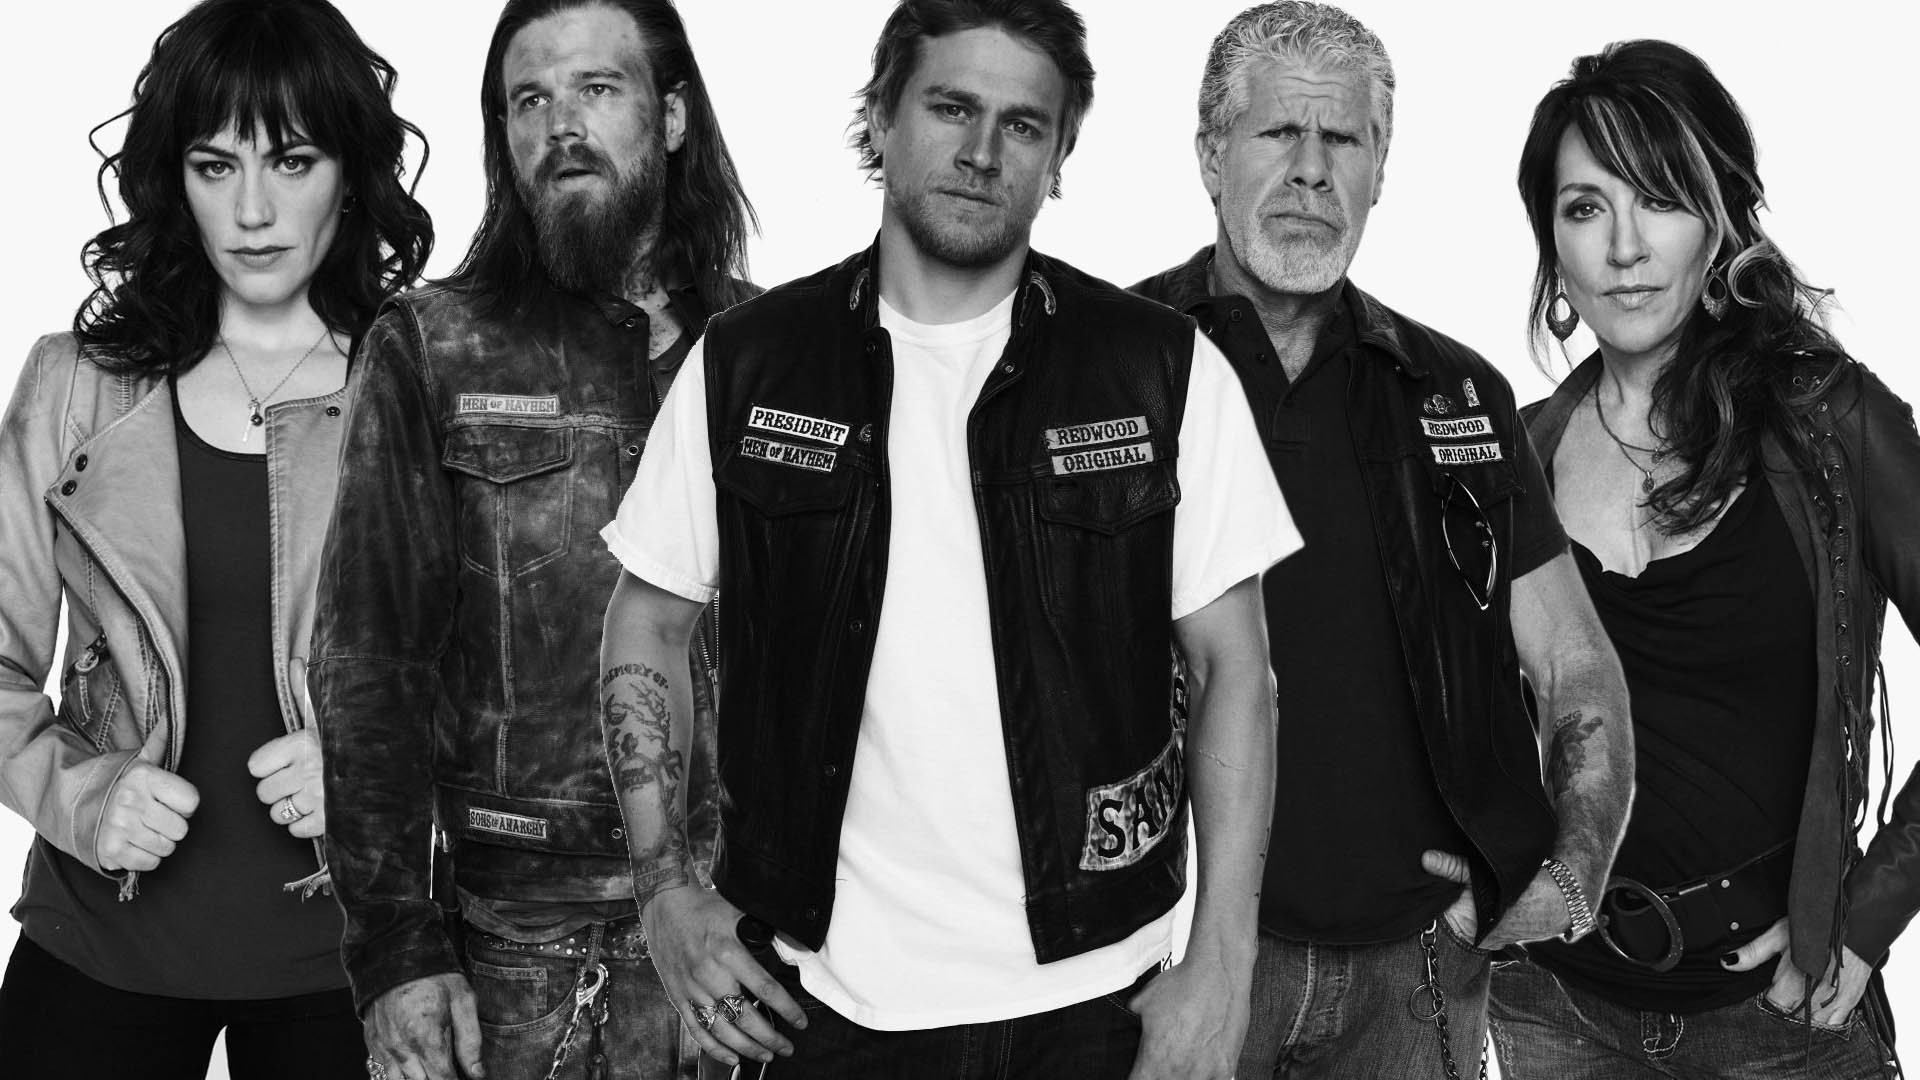 sons of anarchy Wallpaper